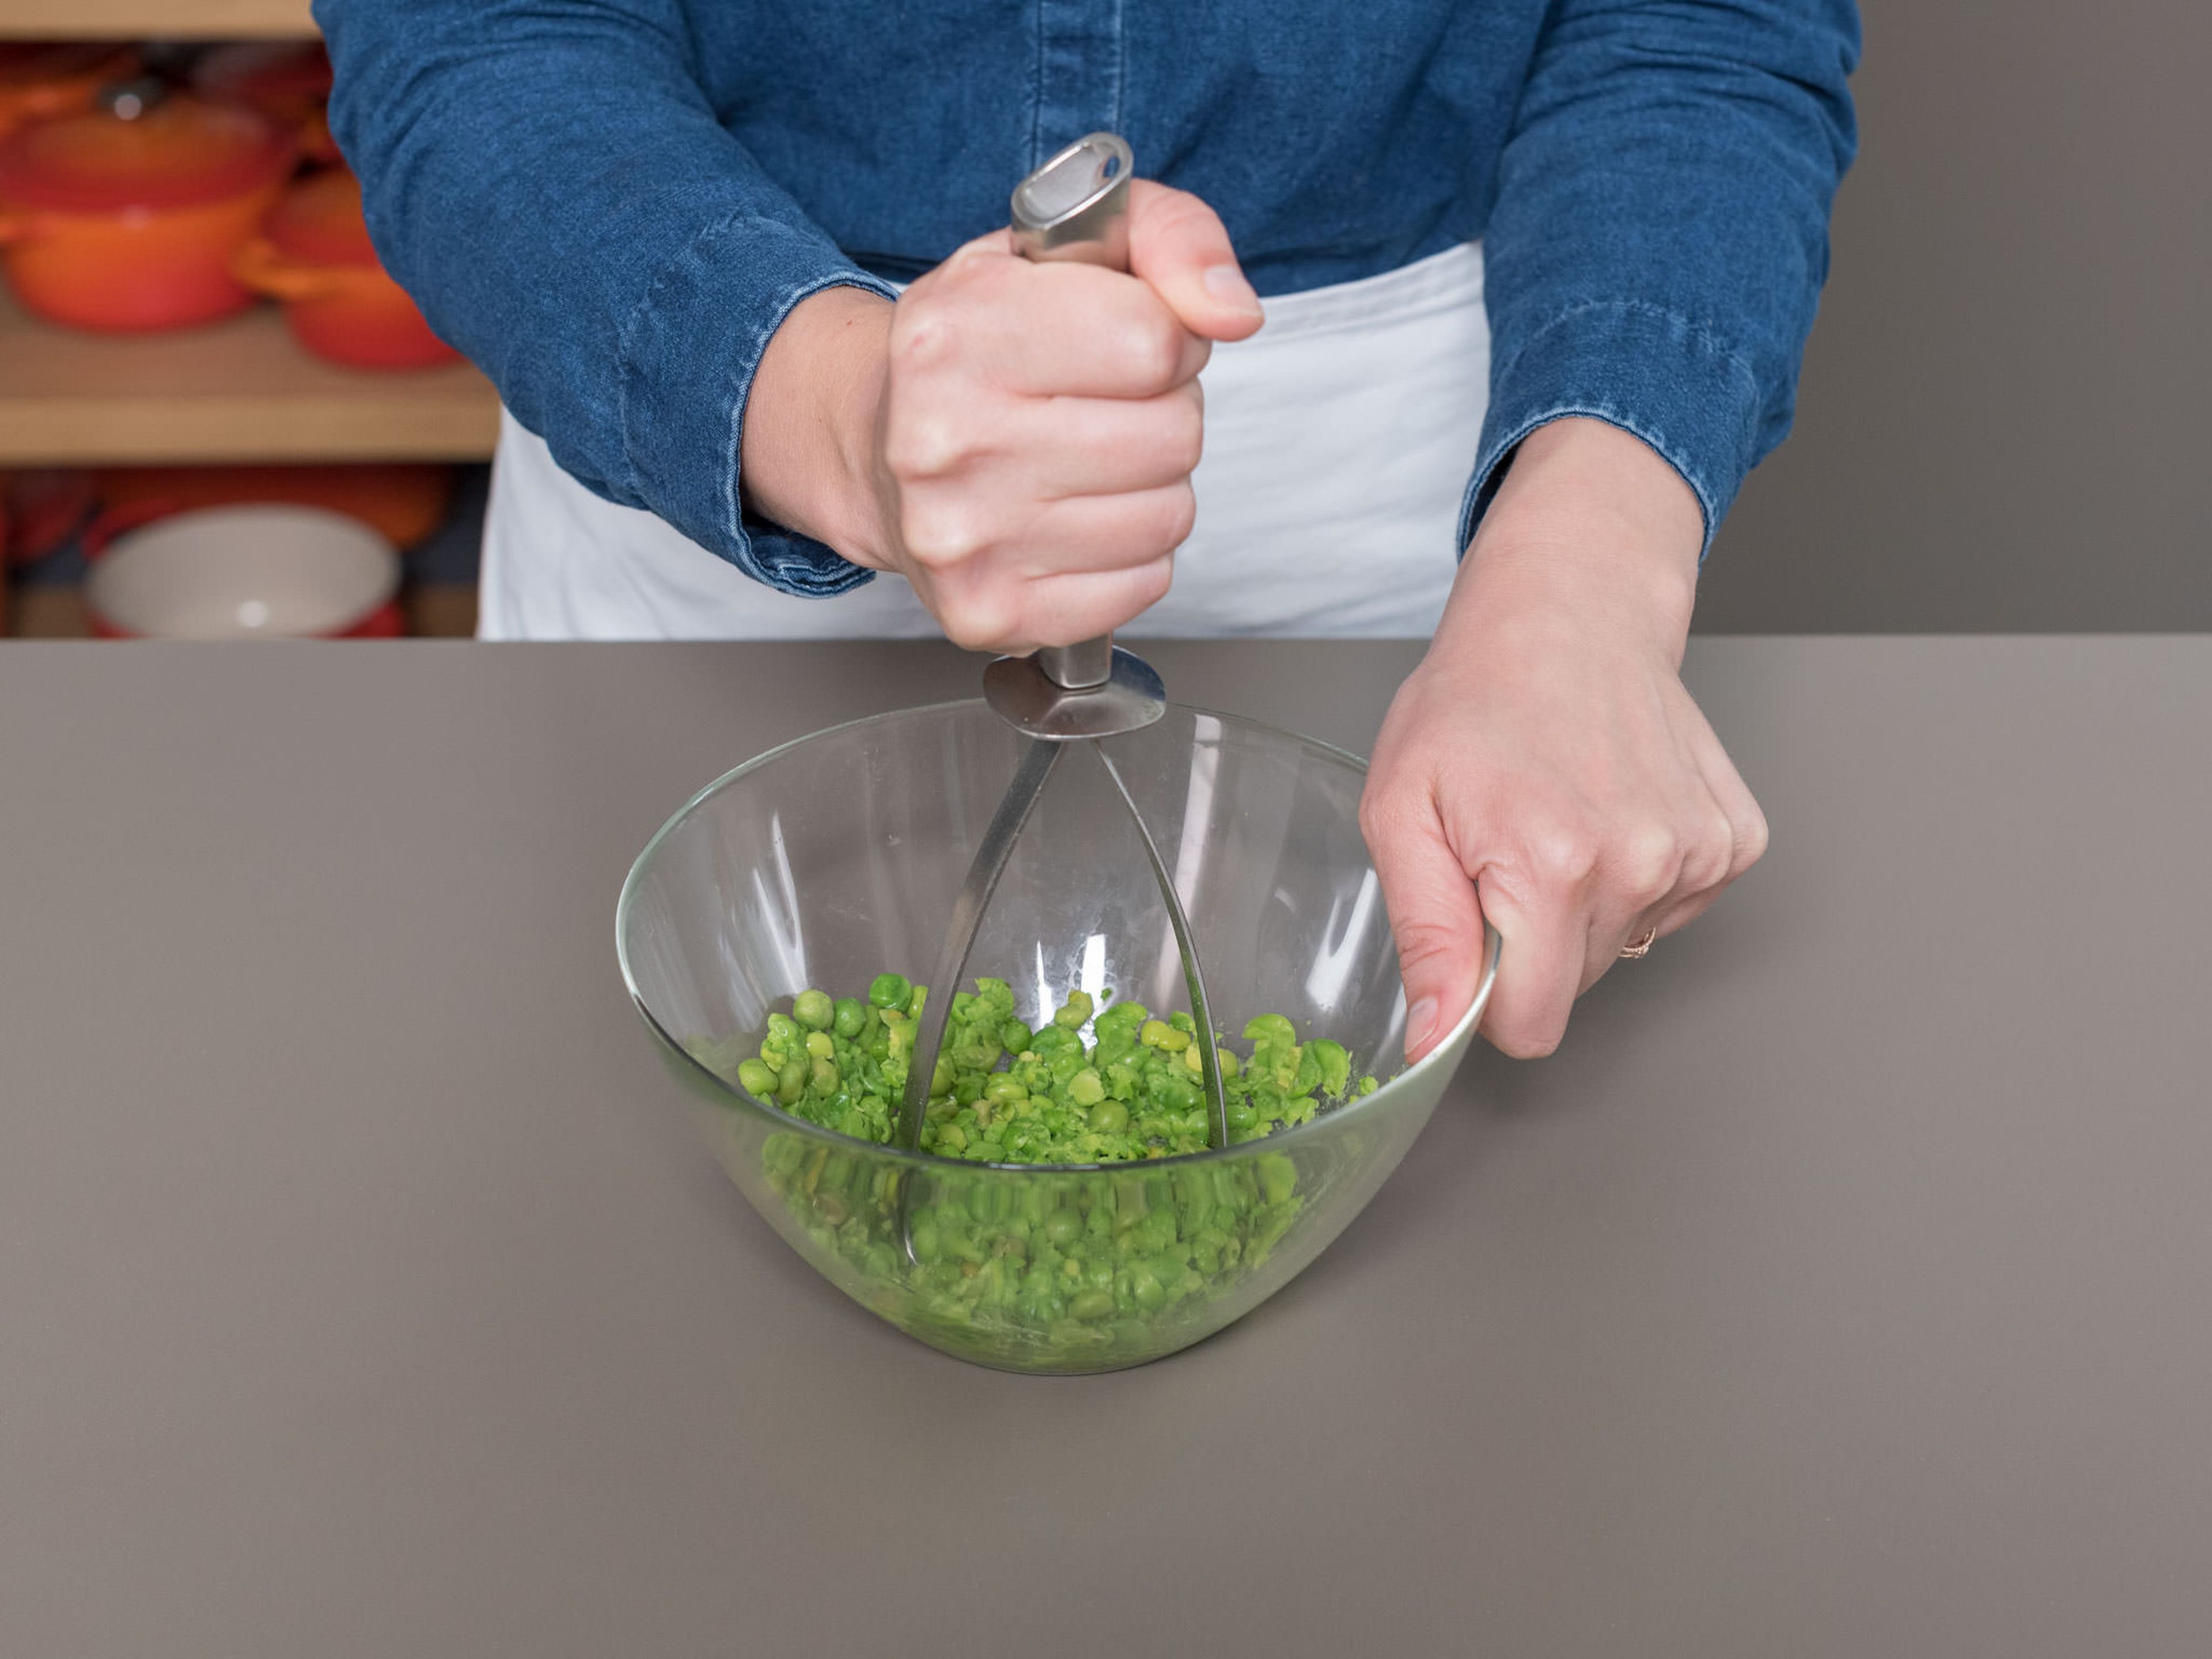 In a large bowl, defrost peas in boiling water for approx. 2 min., then drain and roughly mash with a potato masher.